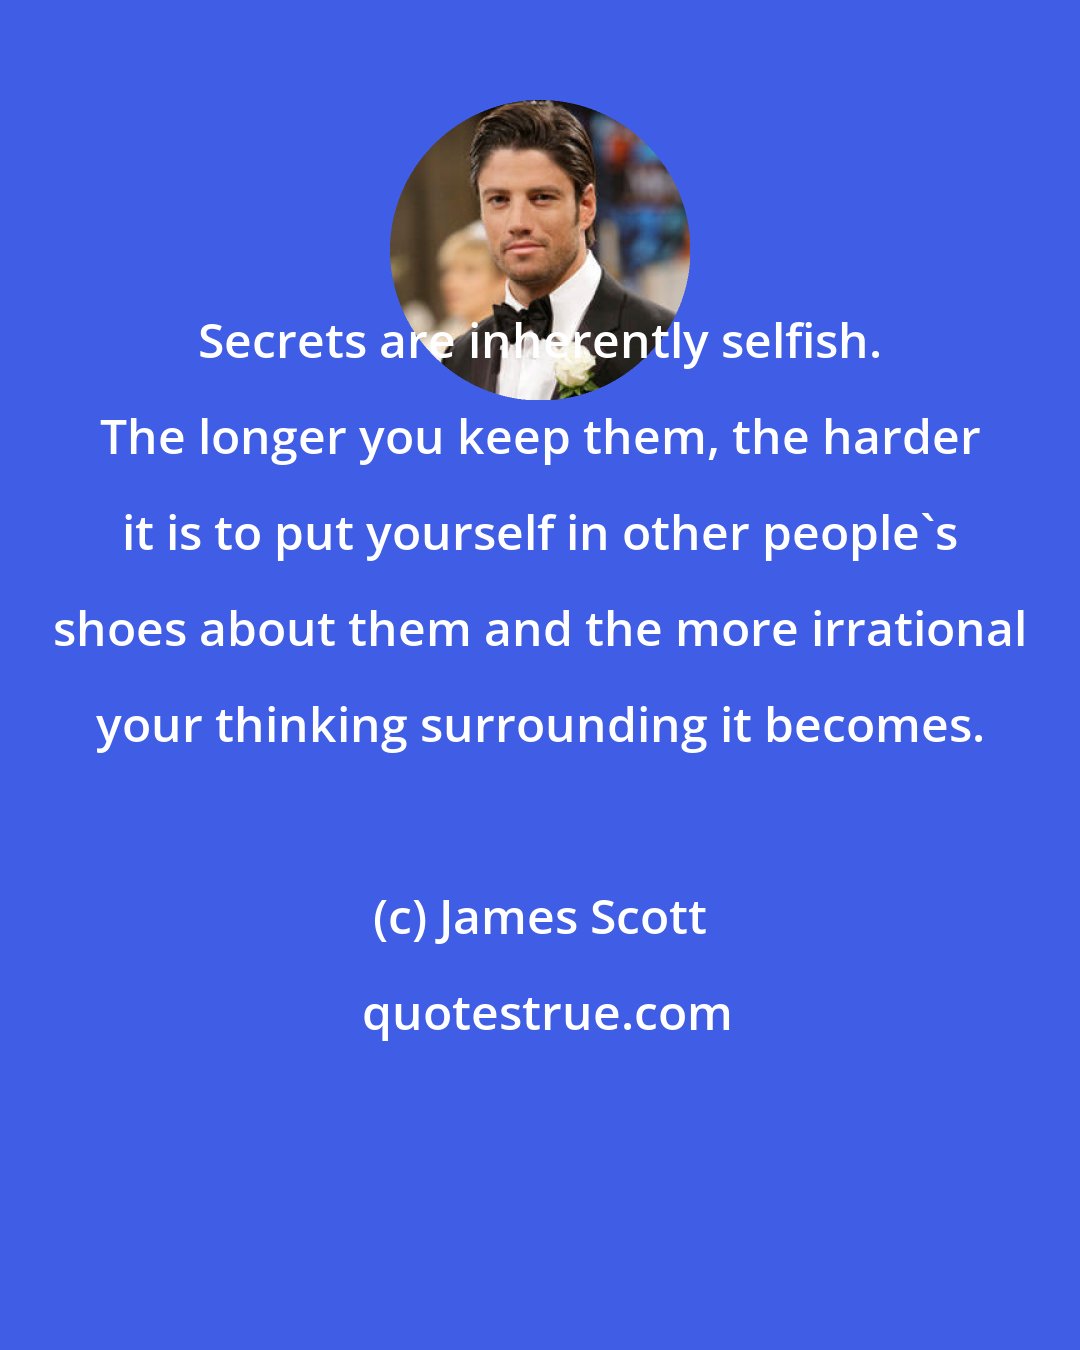 James Scott: Secrets are inherently selfish. The longer you keep them, the harder it is to put yourself in other people's shoes about them and the more irrational your thinking surrounding it becomes.